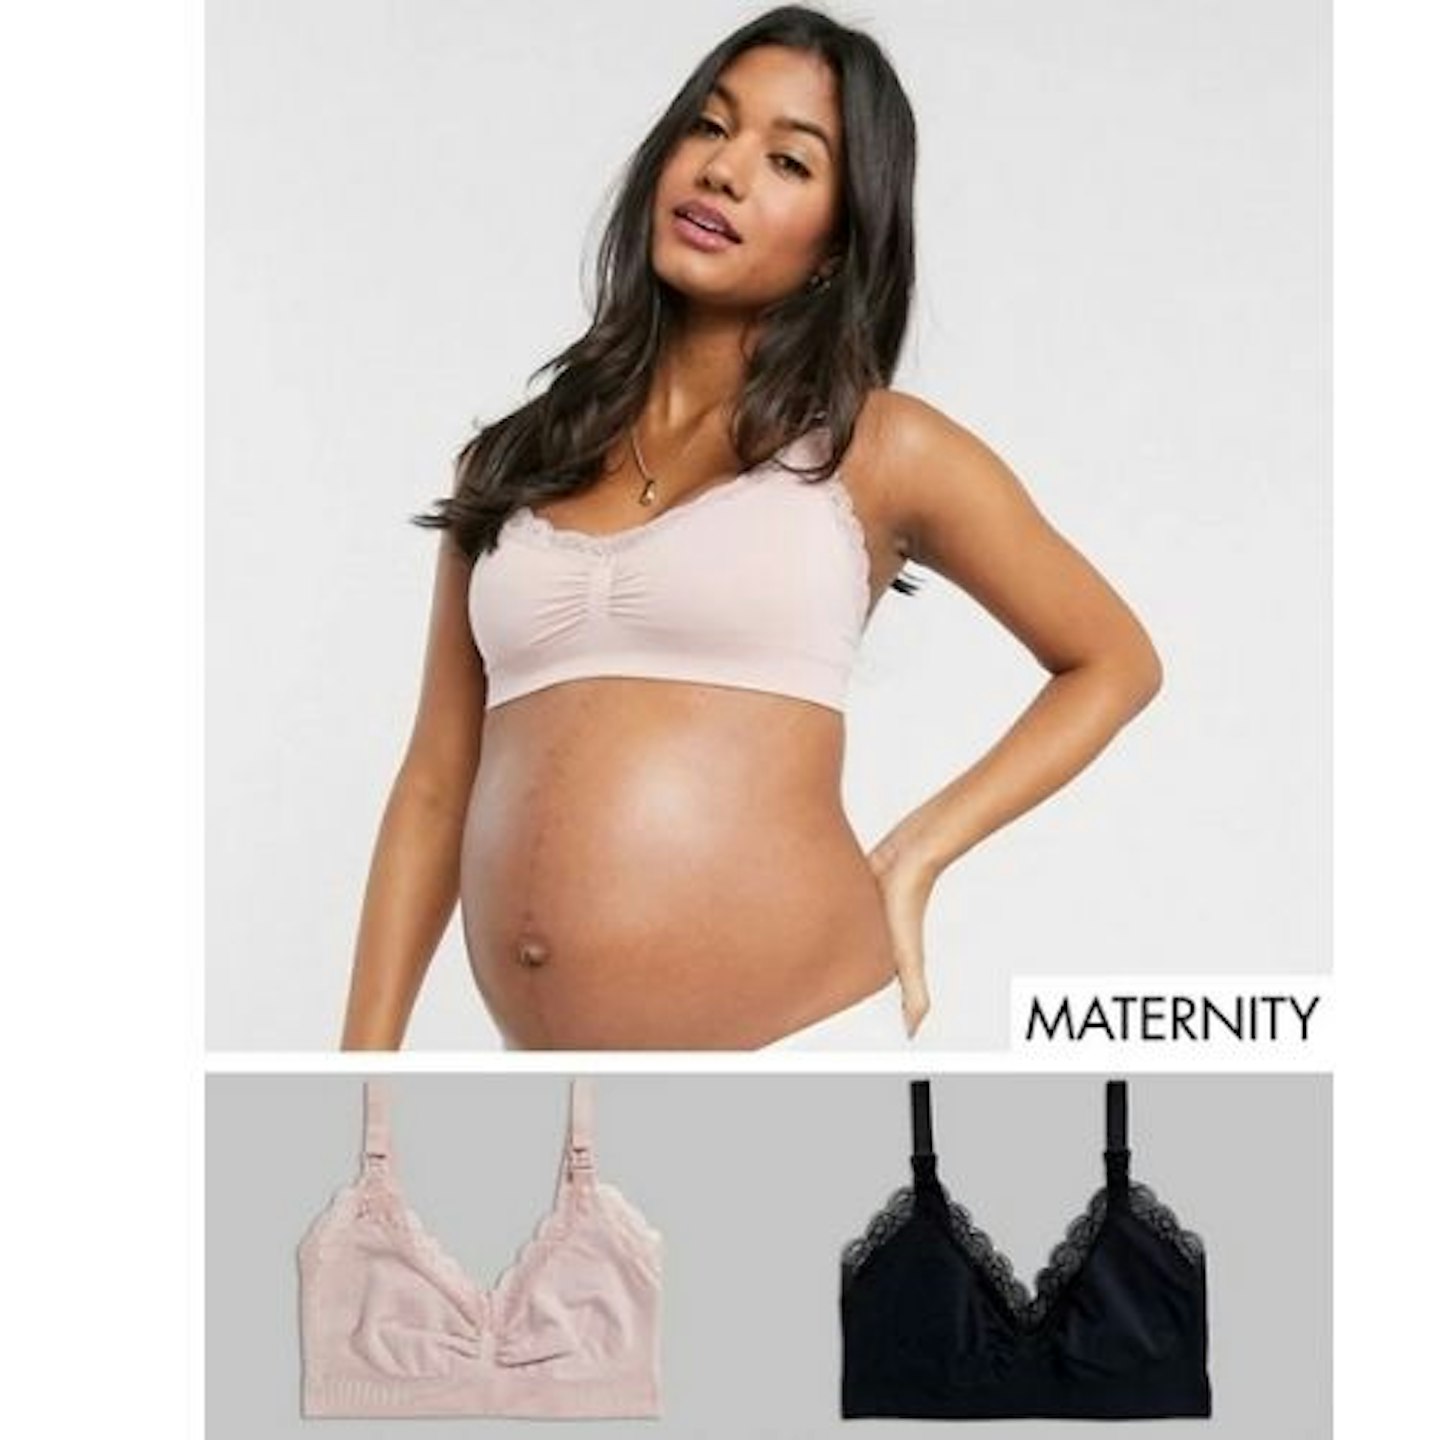 https://images.bauerhosting.com/affiliates/sites/12/motherandbaby/legacy/root/lindex-mom-2-pack-seamless-with-lace-nursing-bra-in-pink-and-black.jpg?auto=format&w=1440&q=80